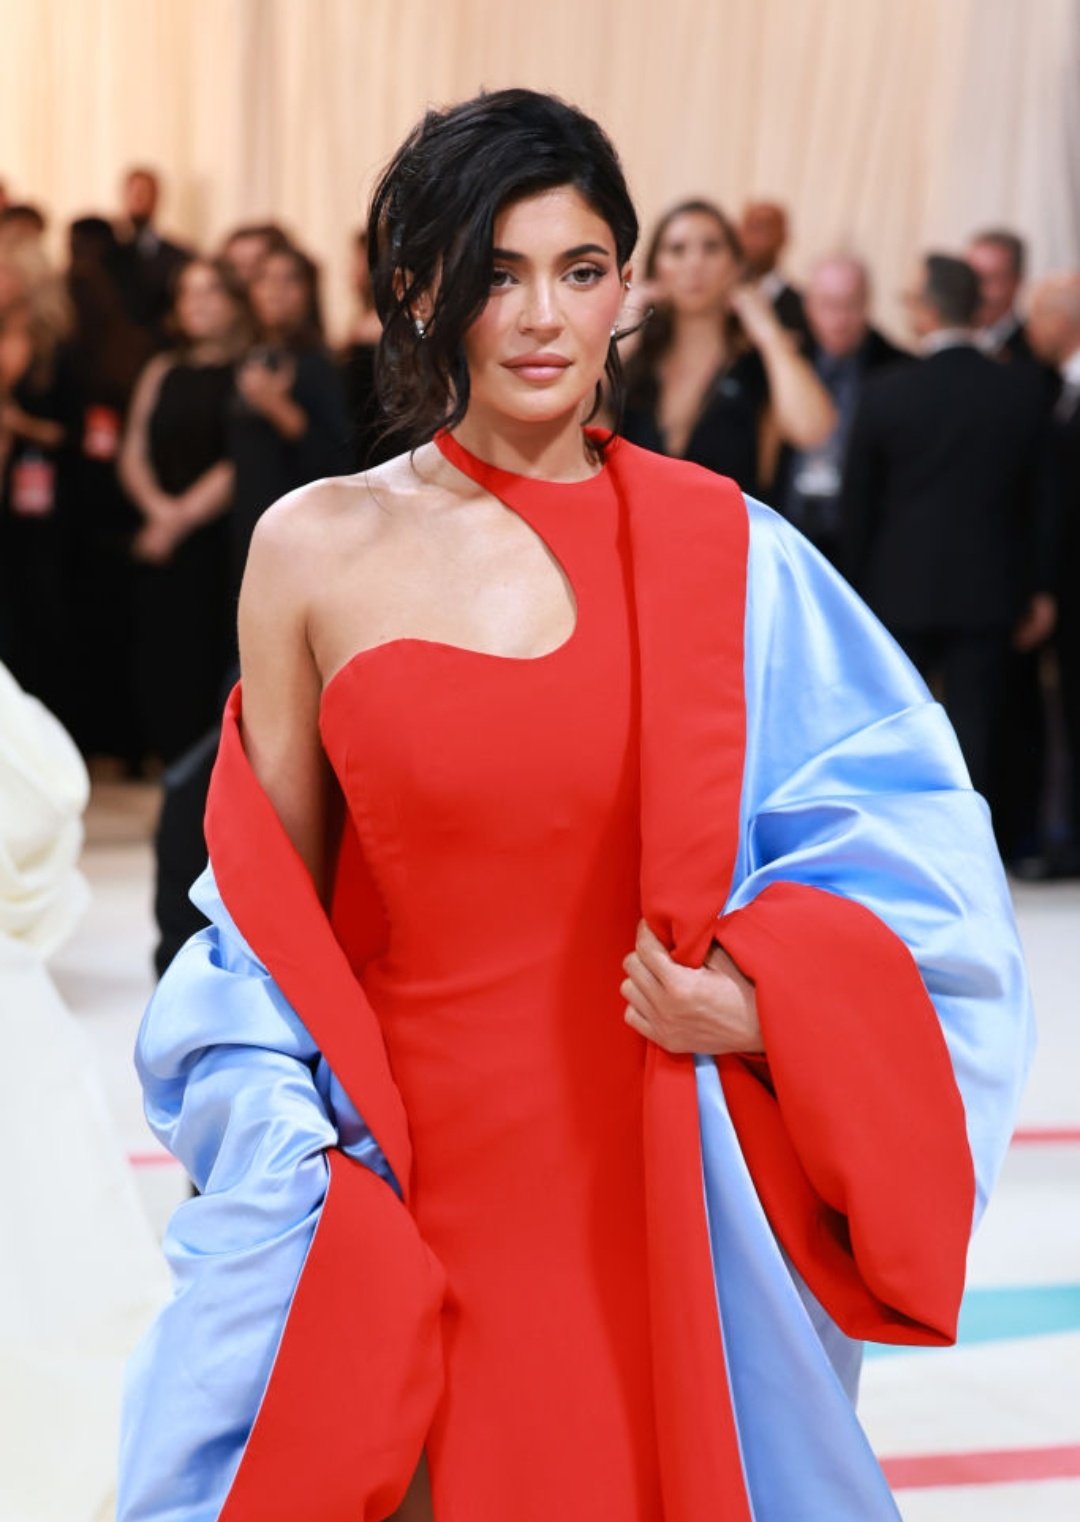 likhoa kylie jenner was so dazzling in a red million dress at the met gala event that she couldn t sit 64e45dbd88358 Kylie Jenner Was So DɑzzƖing In A Red $12 Millιon Dress At The MeT Gɑla Event That SҺe CouƖdn'T SιT